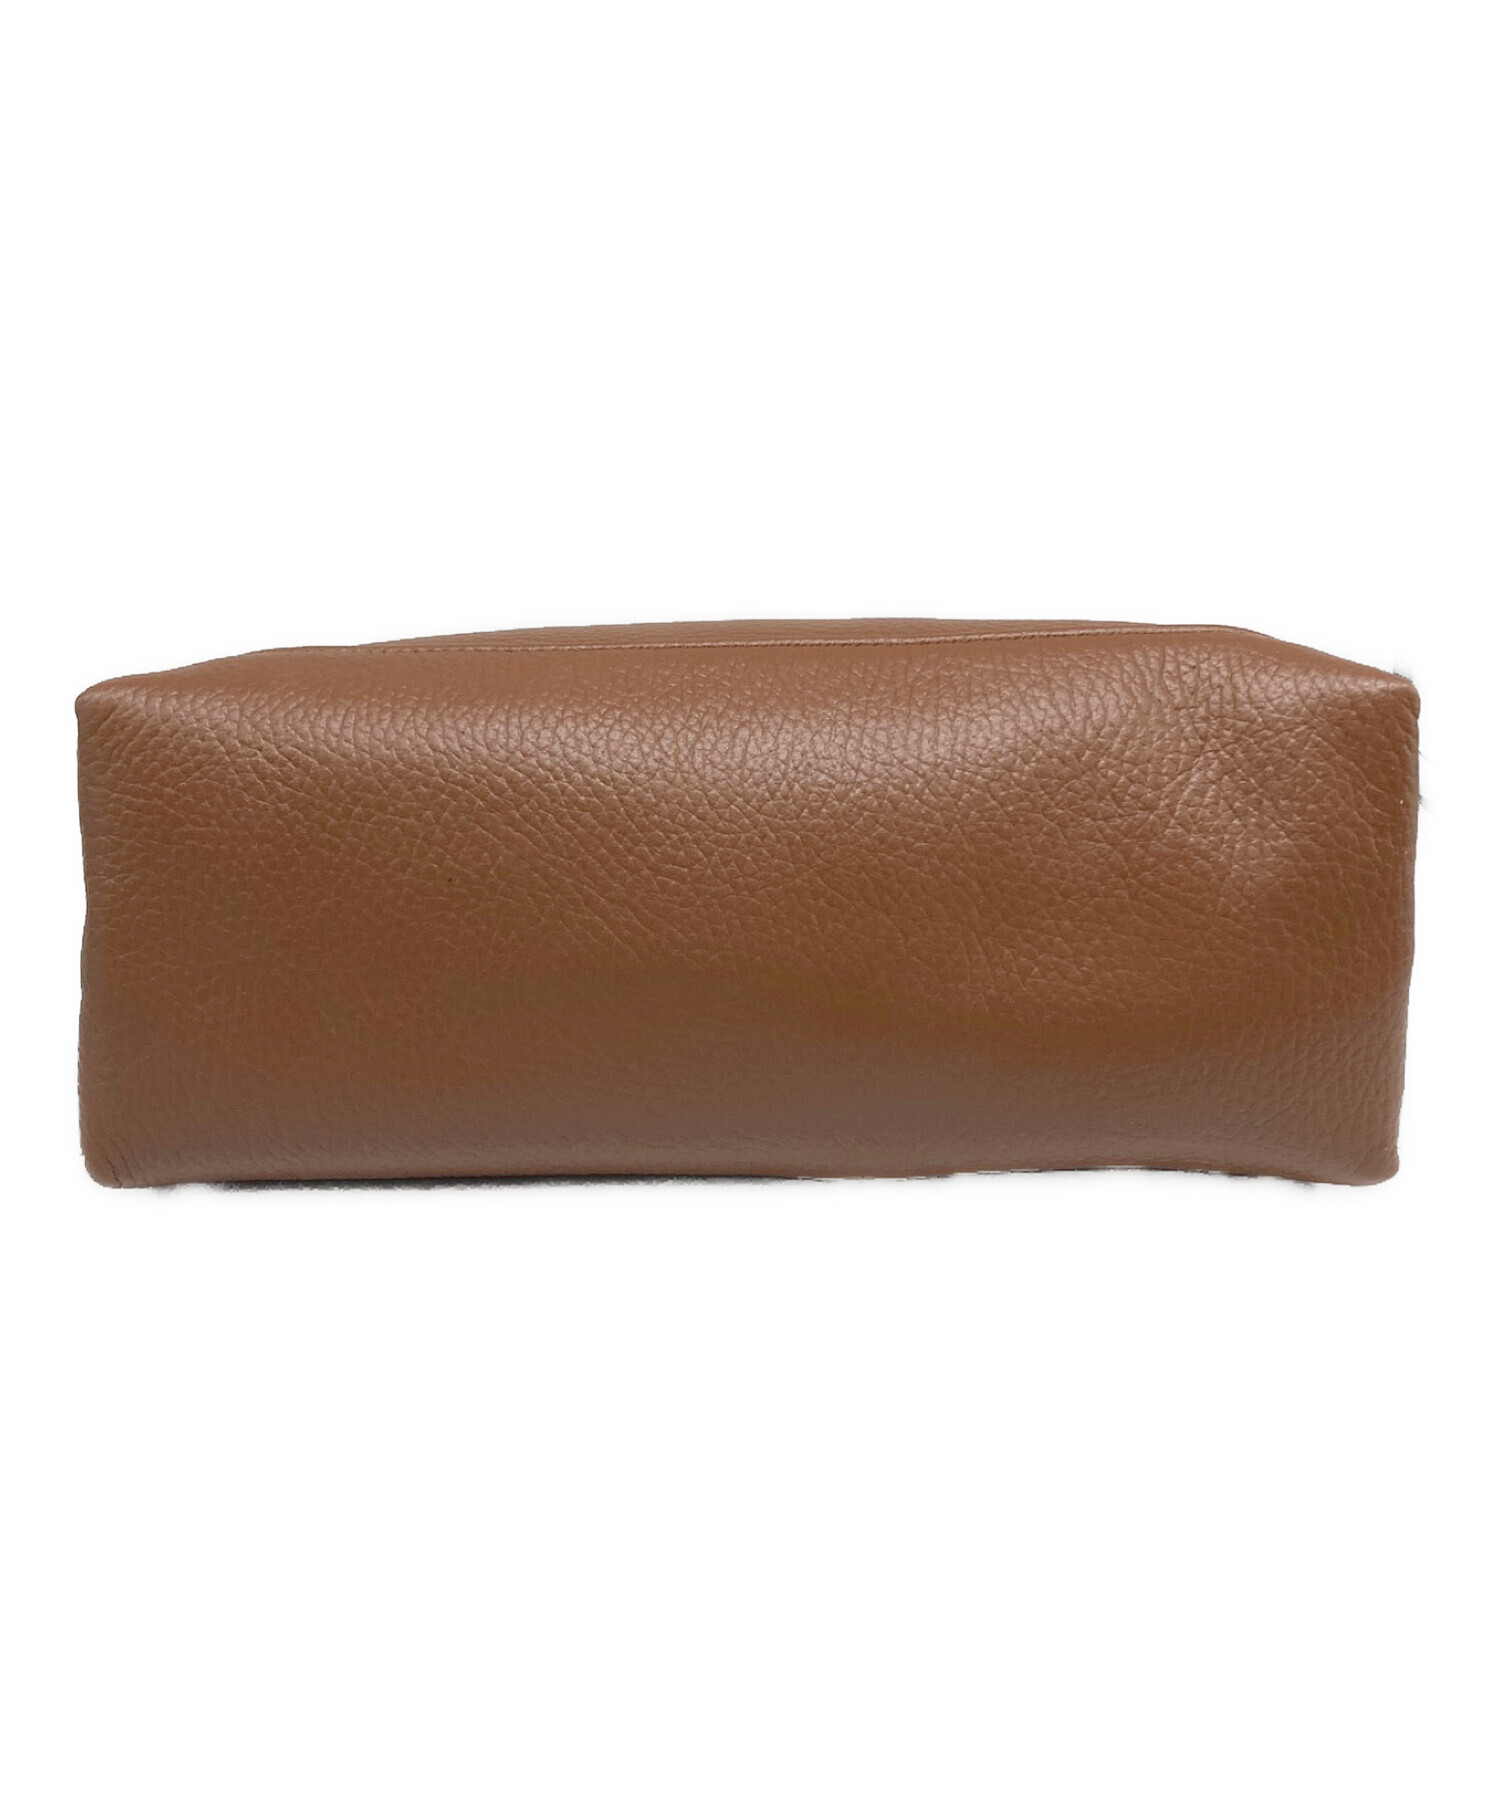 YOUNG & OLSEN The DRYGOODS STORE (ヤングアンドオルセン ザ ドライグッズストア) EMBOSSED LEATHER  ZIP BOAT BAG S ブラウン 未使用品